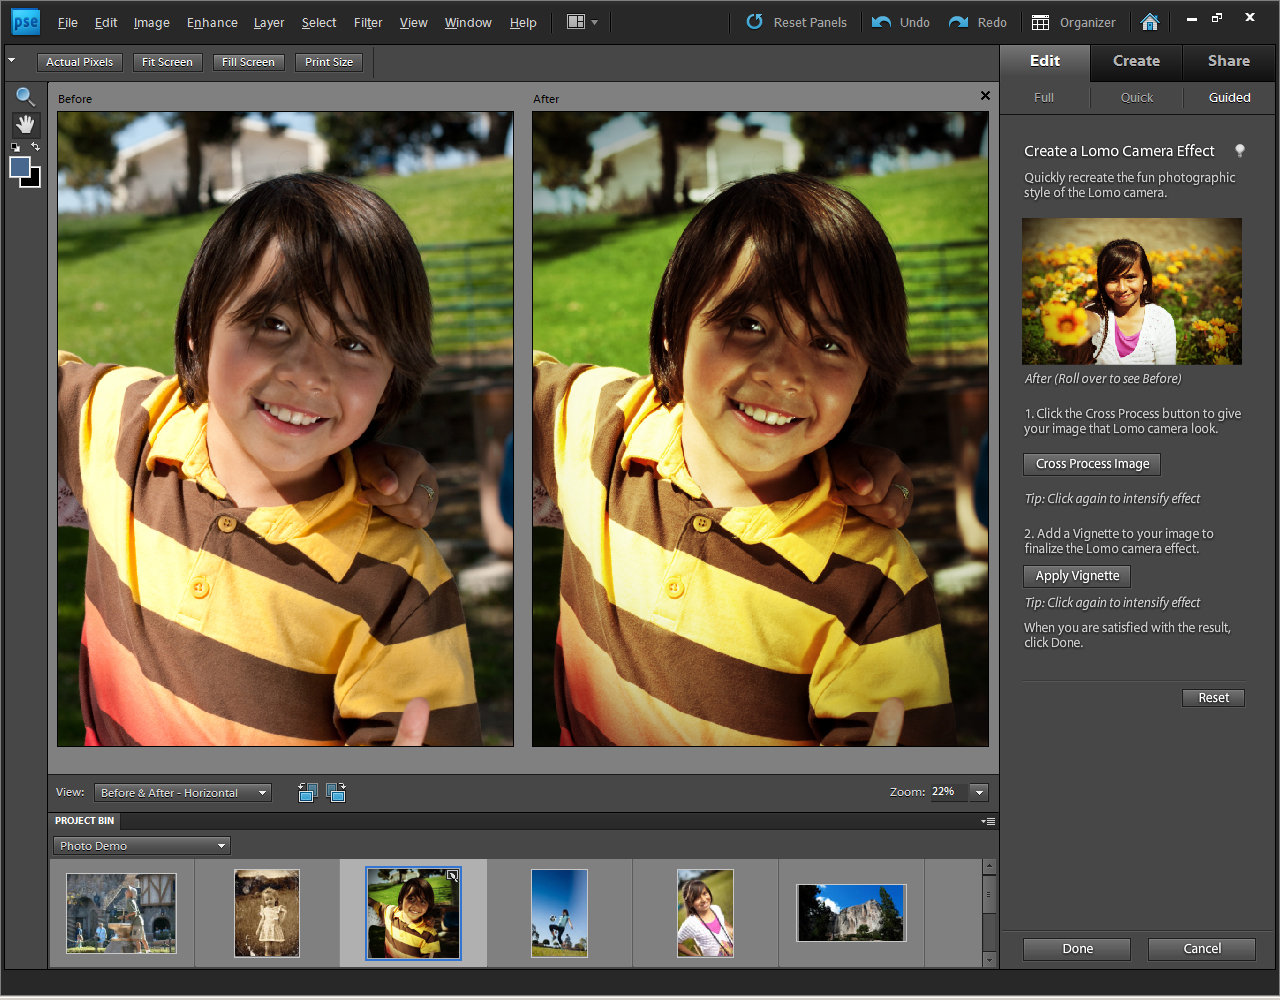 adobe photoshop elements 13 for mac and windows